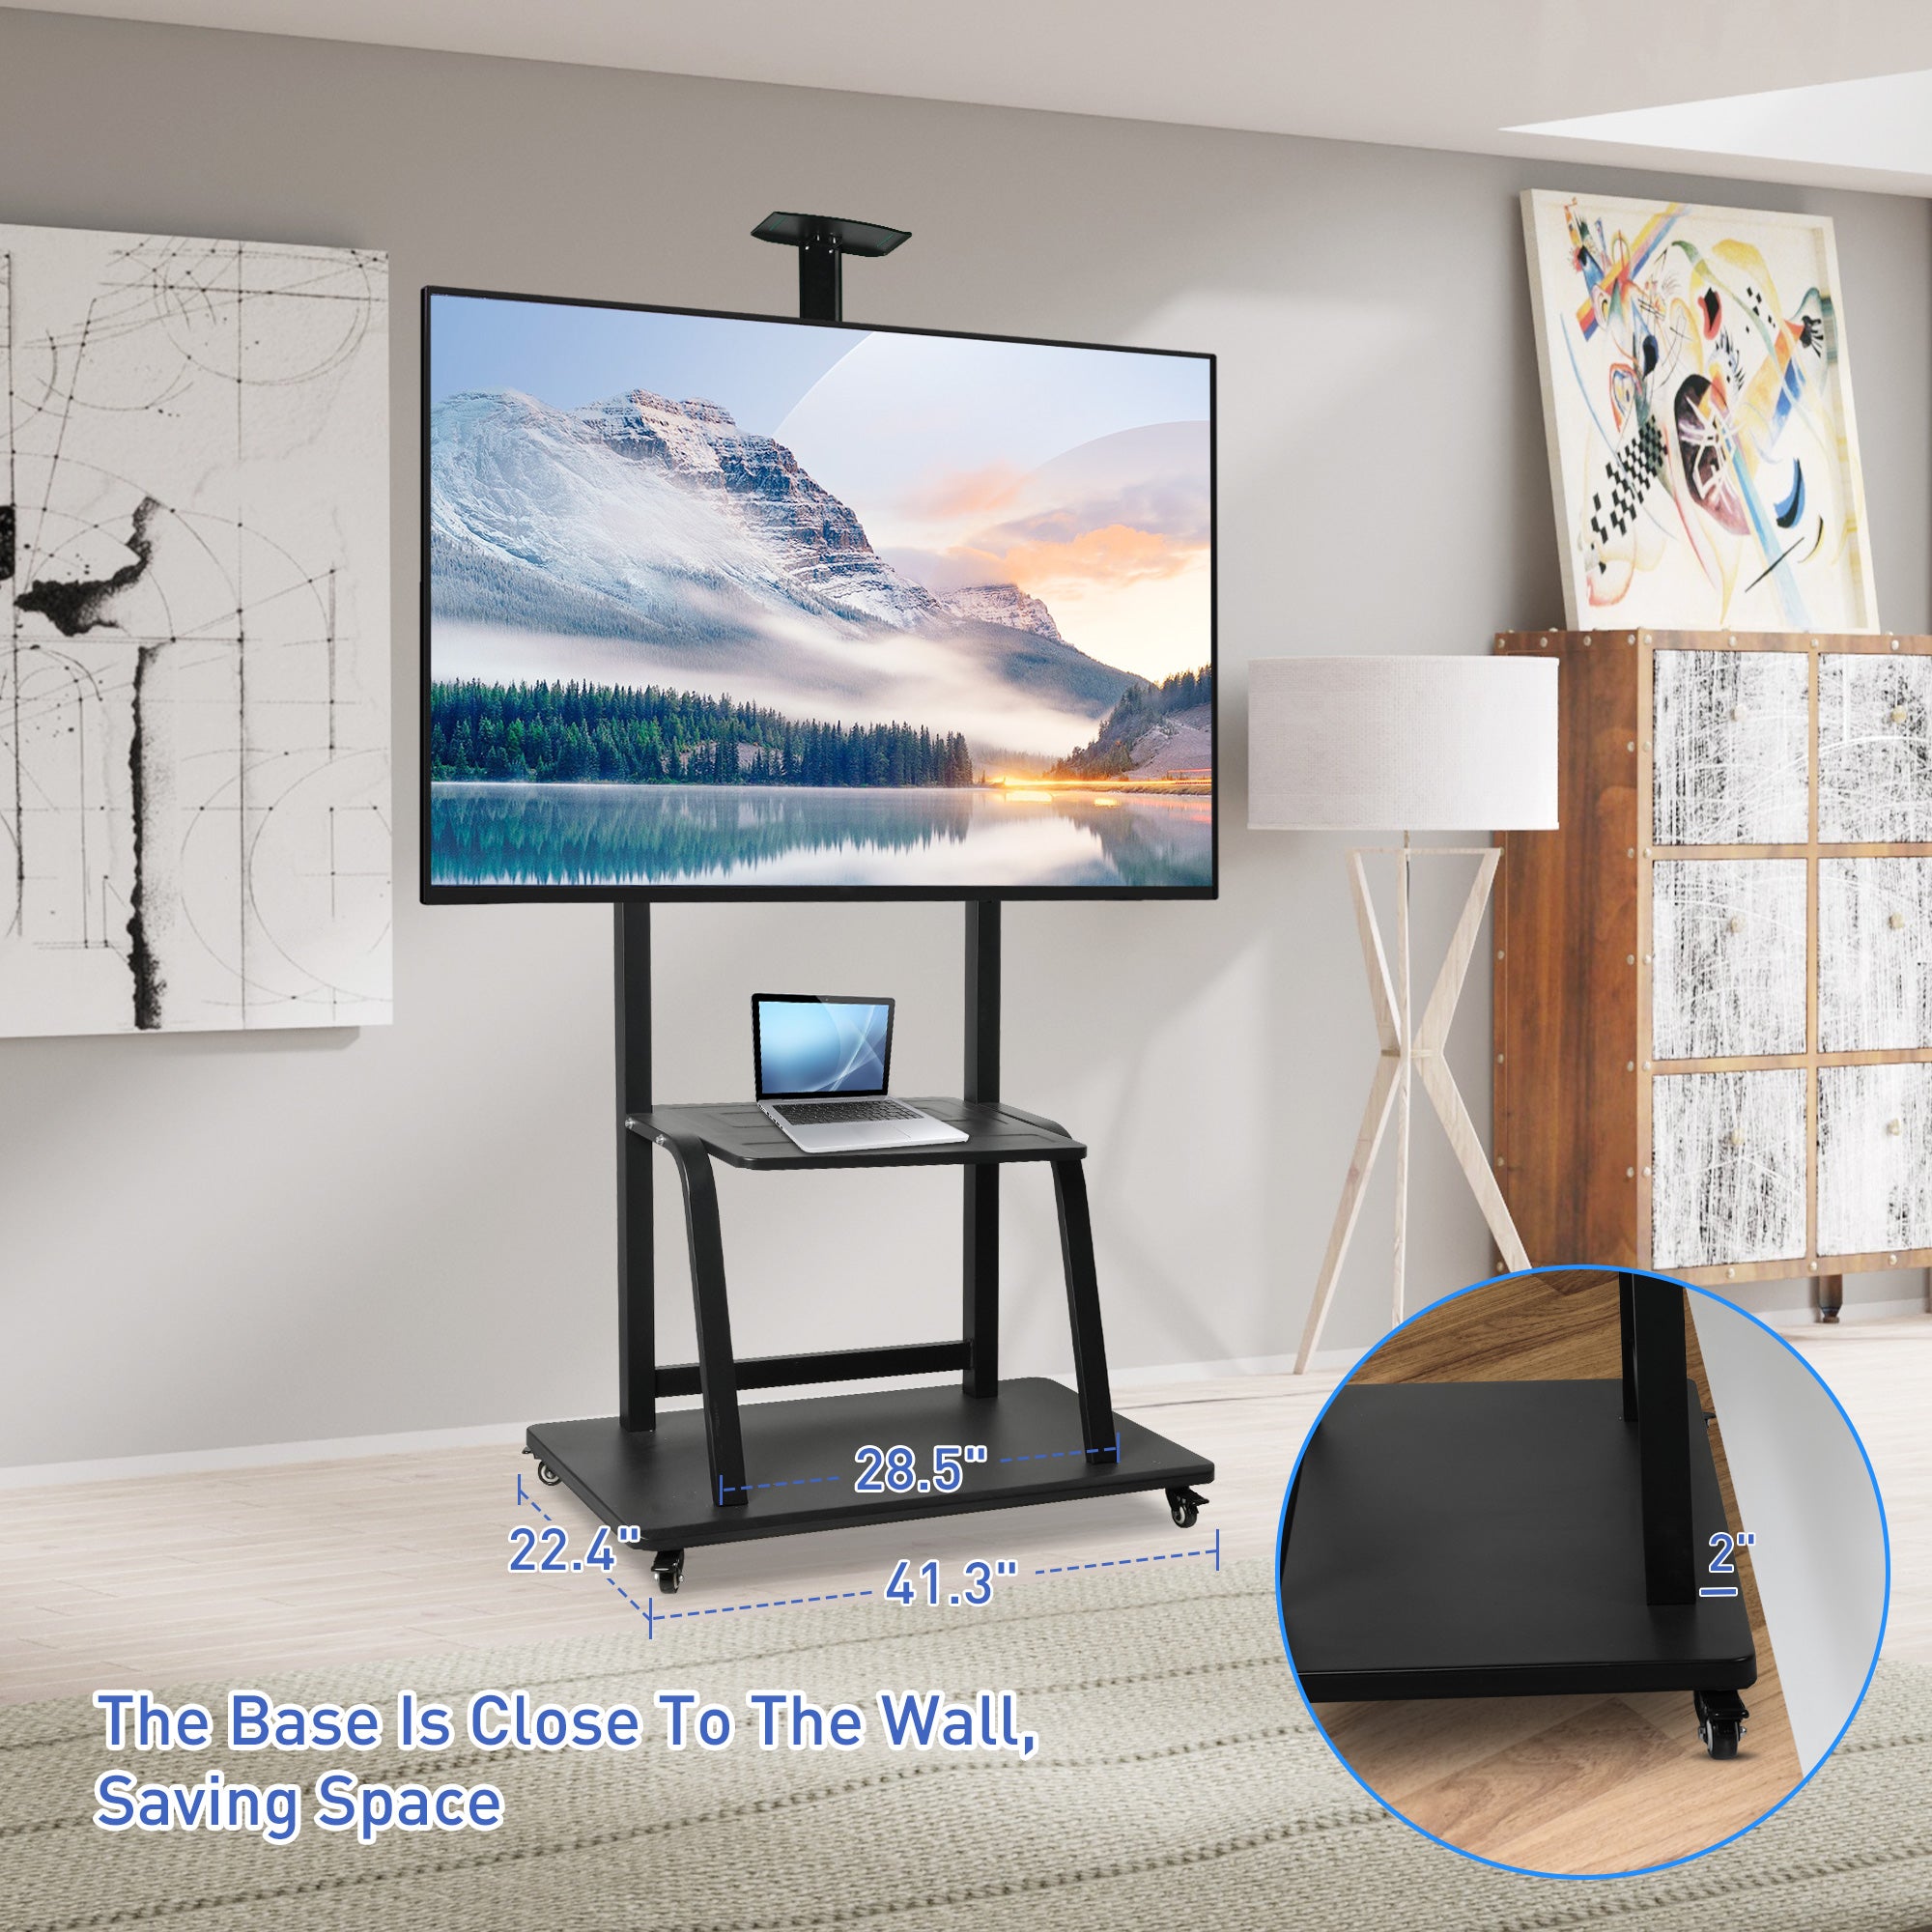 Mobile TV Stand with Wheels for 42-100 Inch Flat Screen TVs - Portable Tall TV Cart with Adjustable Height, Camera Shelf, Holds Up to 330lbs, Max VESA 900x600mm